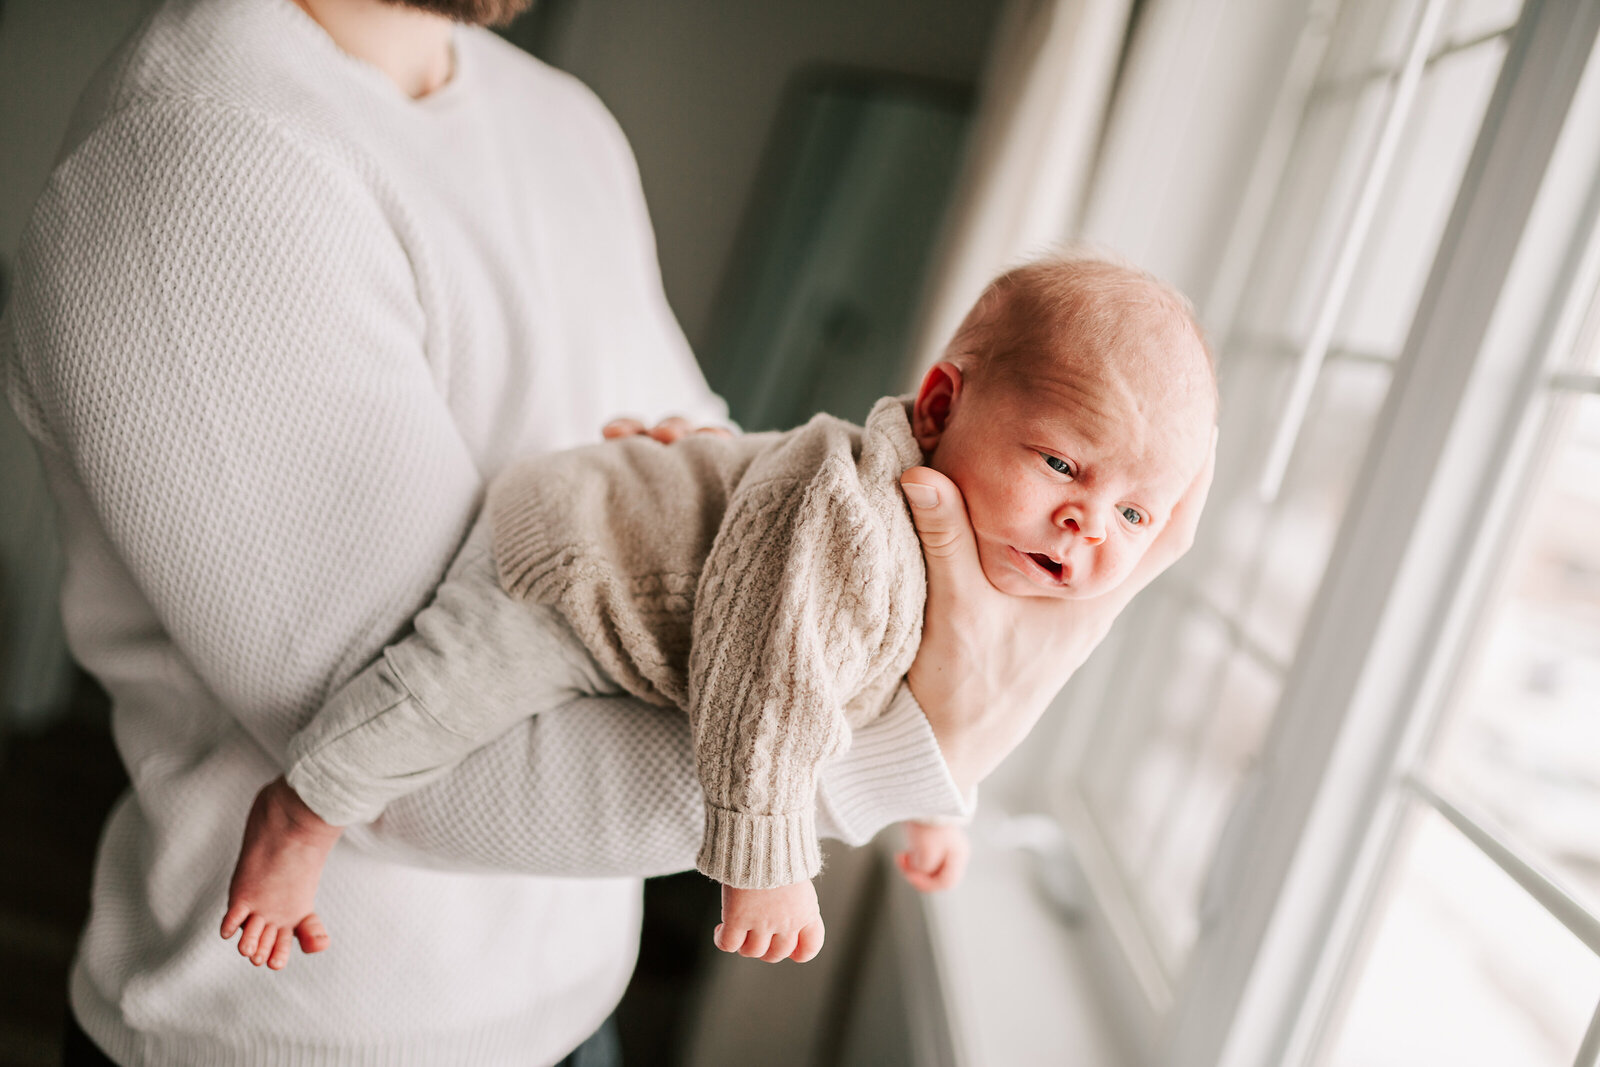 Collingwood-In-Home-Newborn-Photography (25)